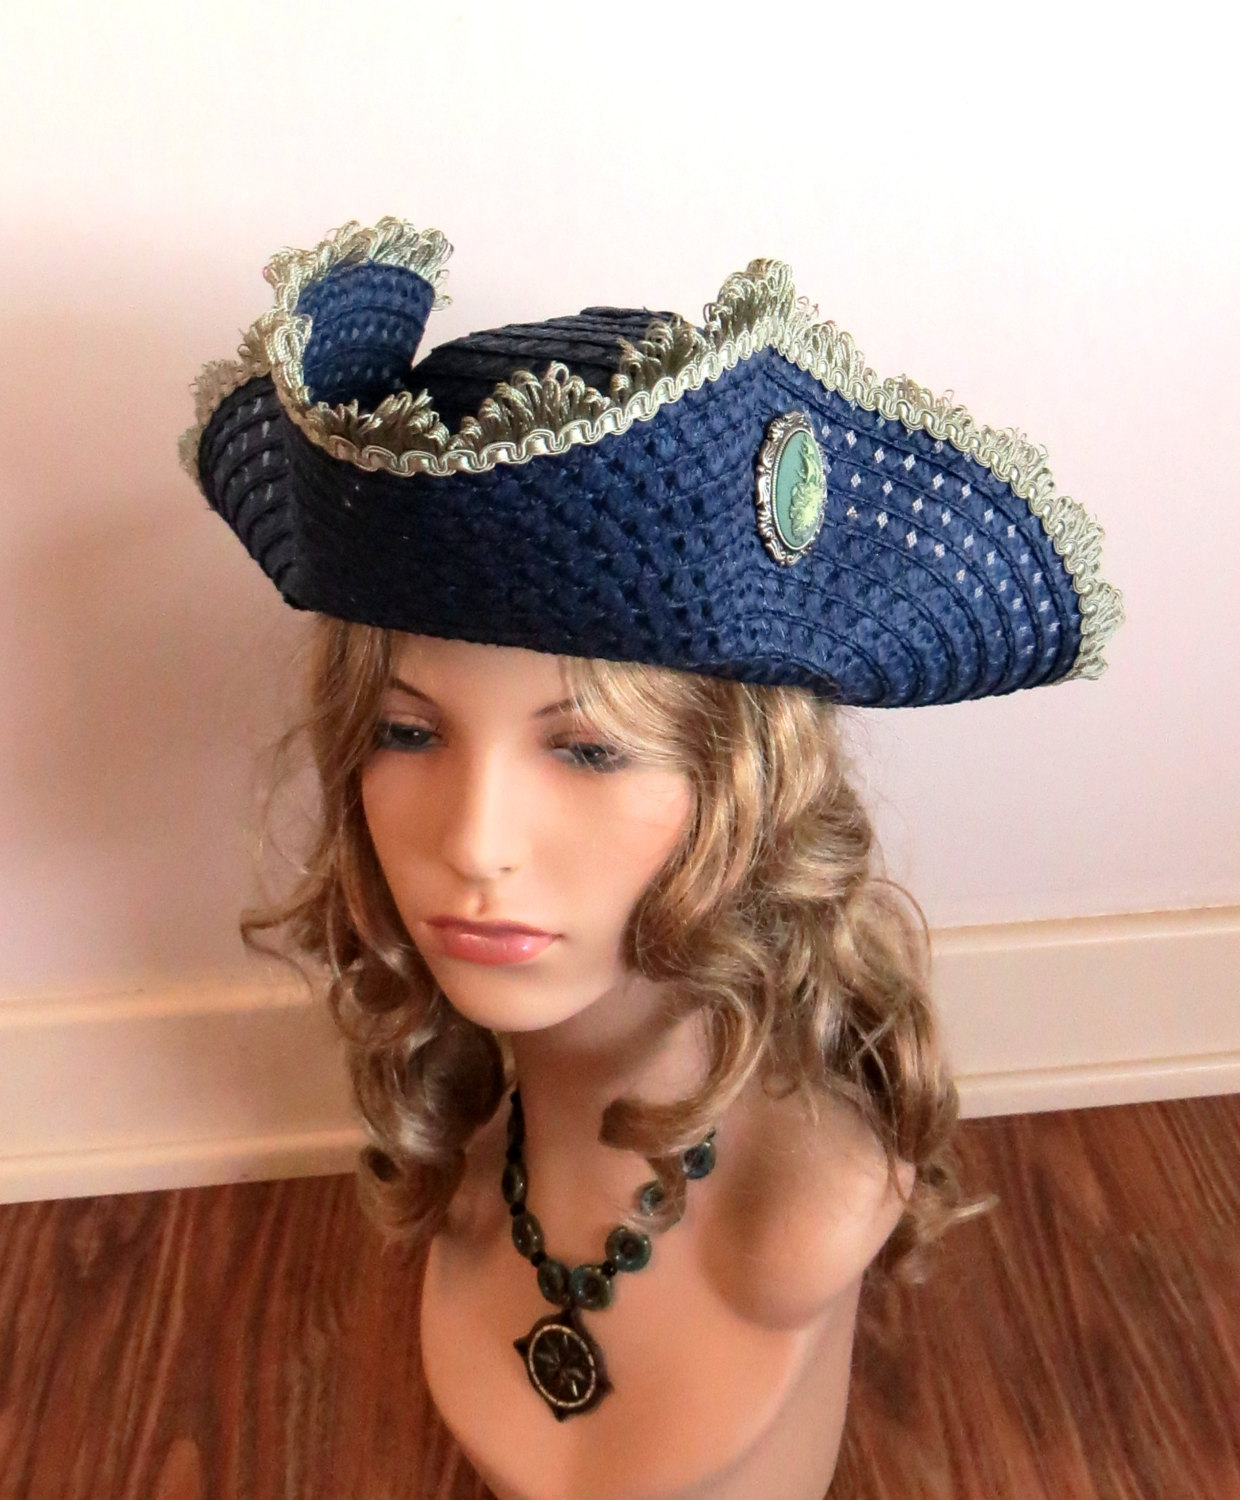 Pirate Tricorn Hat in Blue and Green Trim with Cameo steampunk buy now online